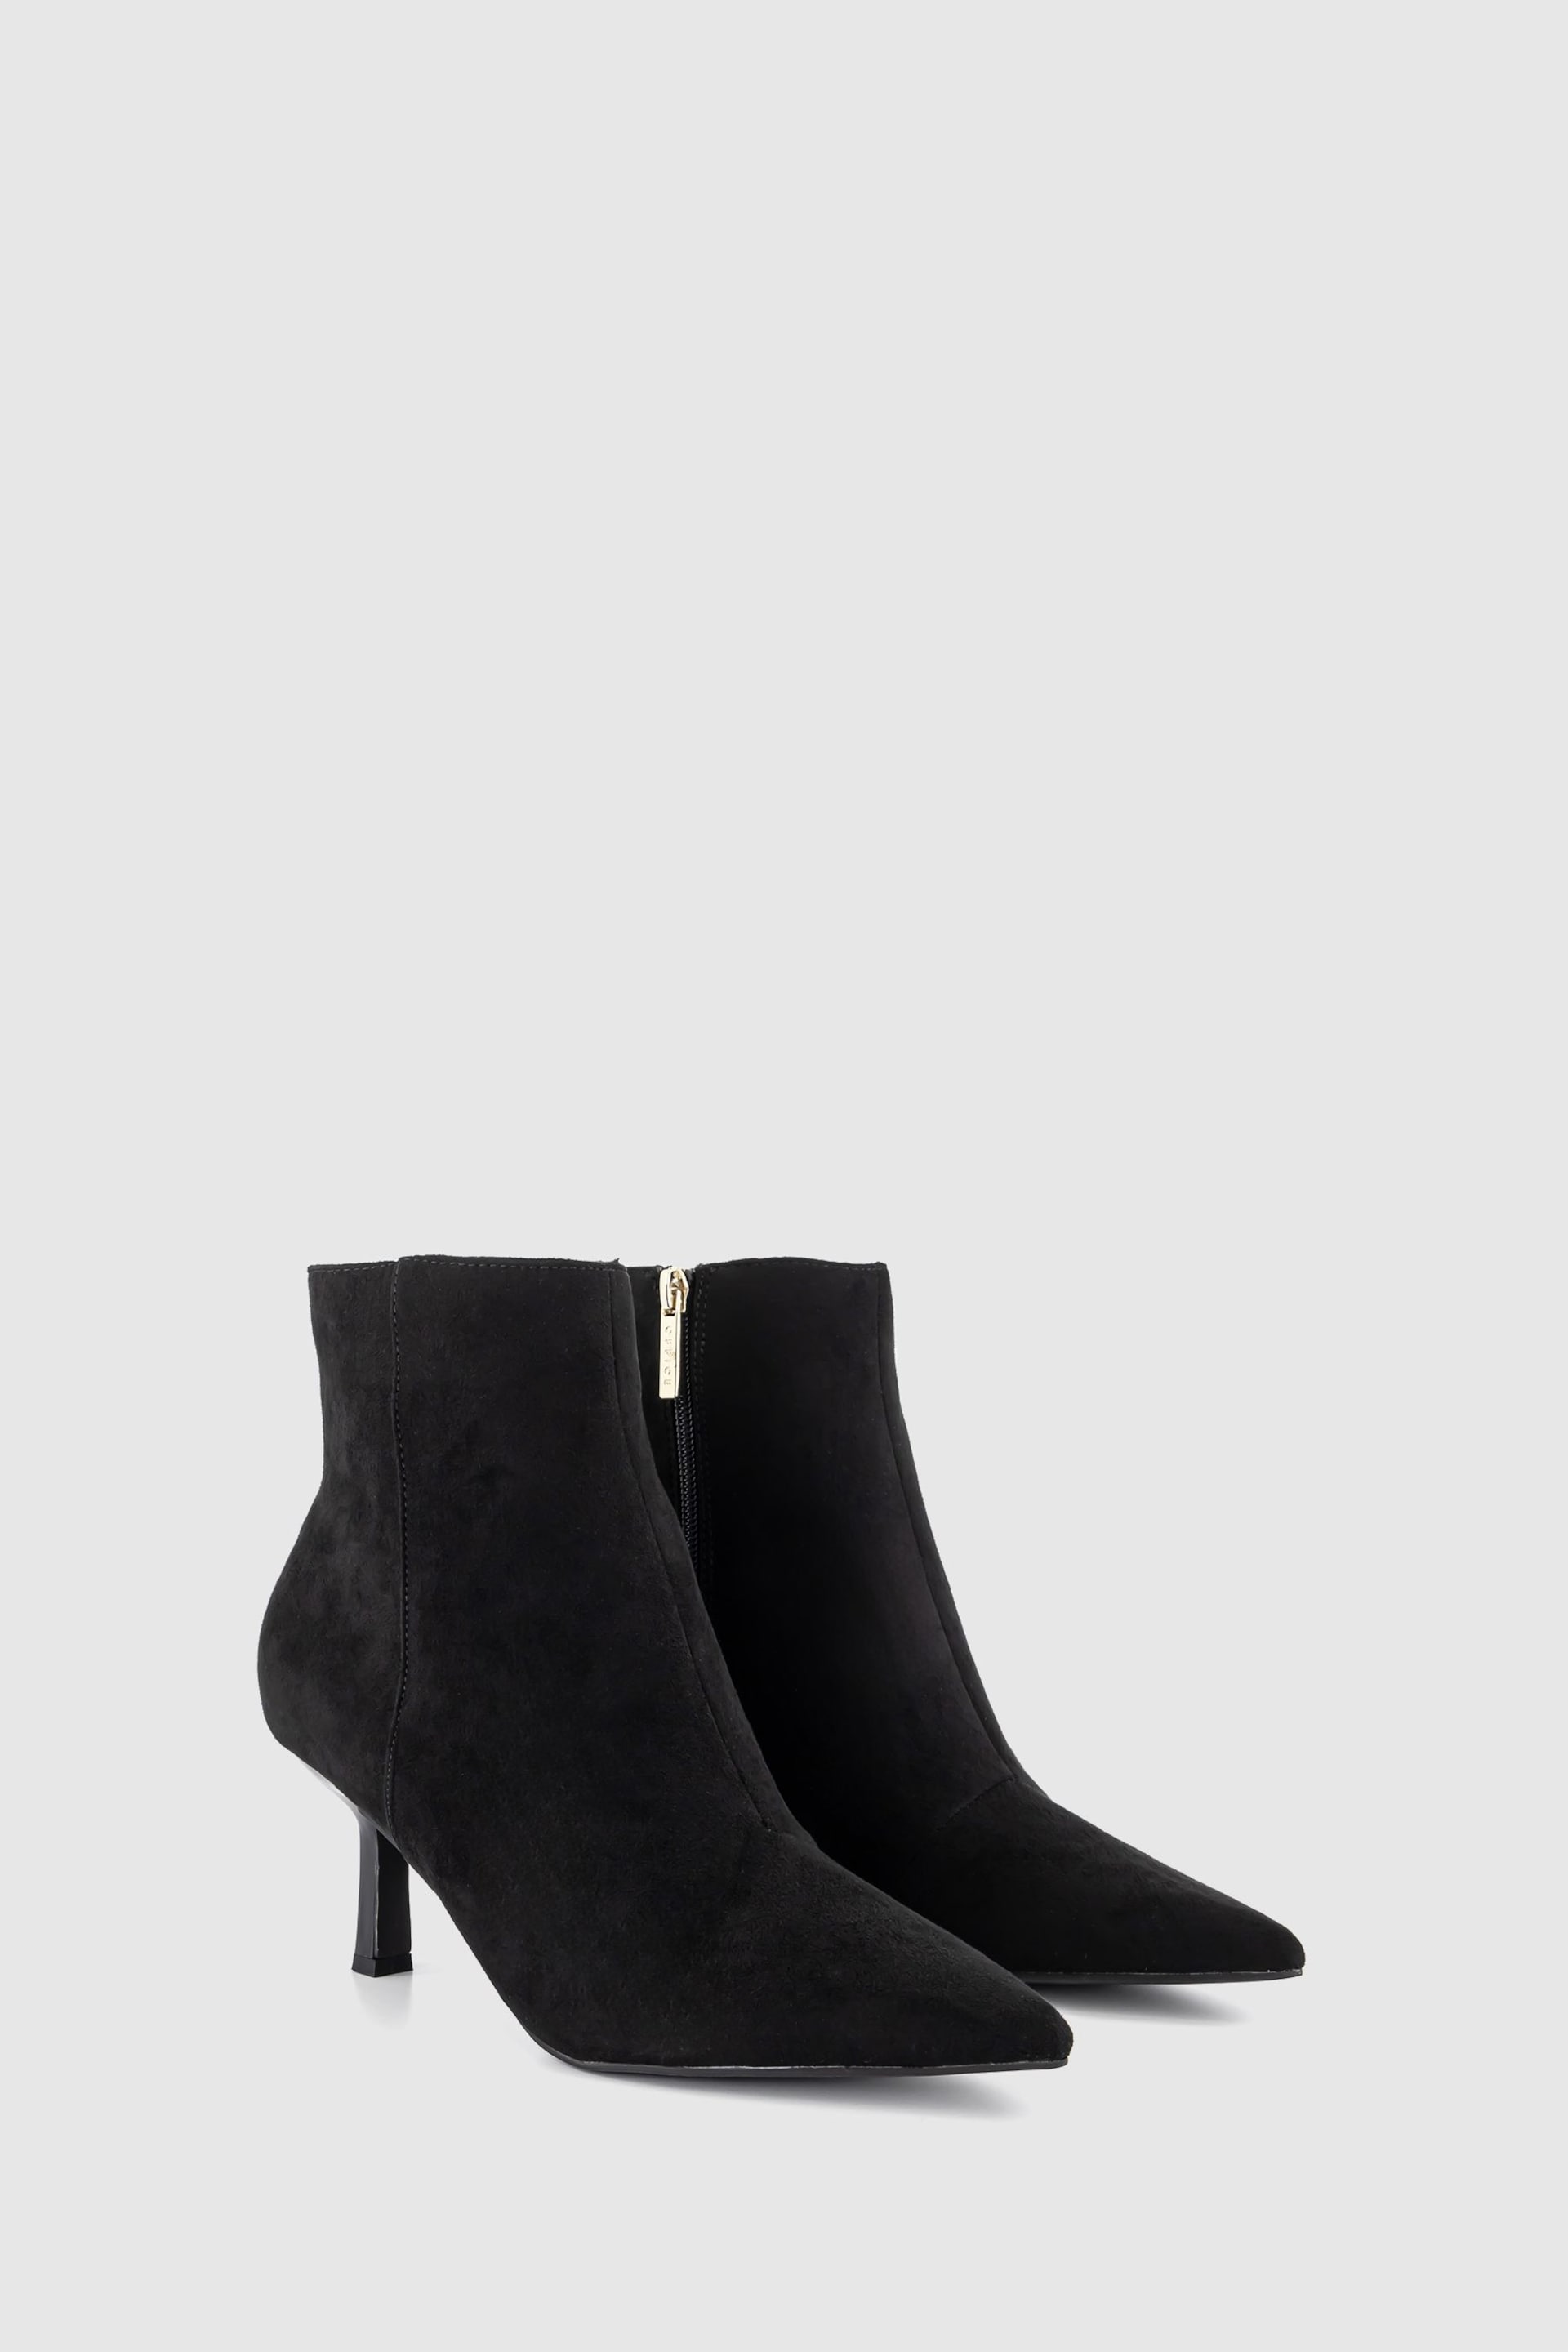 Office Black Ankle Sock Boot With Stiletto Heel - Image 3 of 4